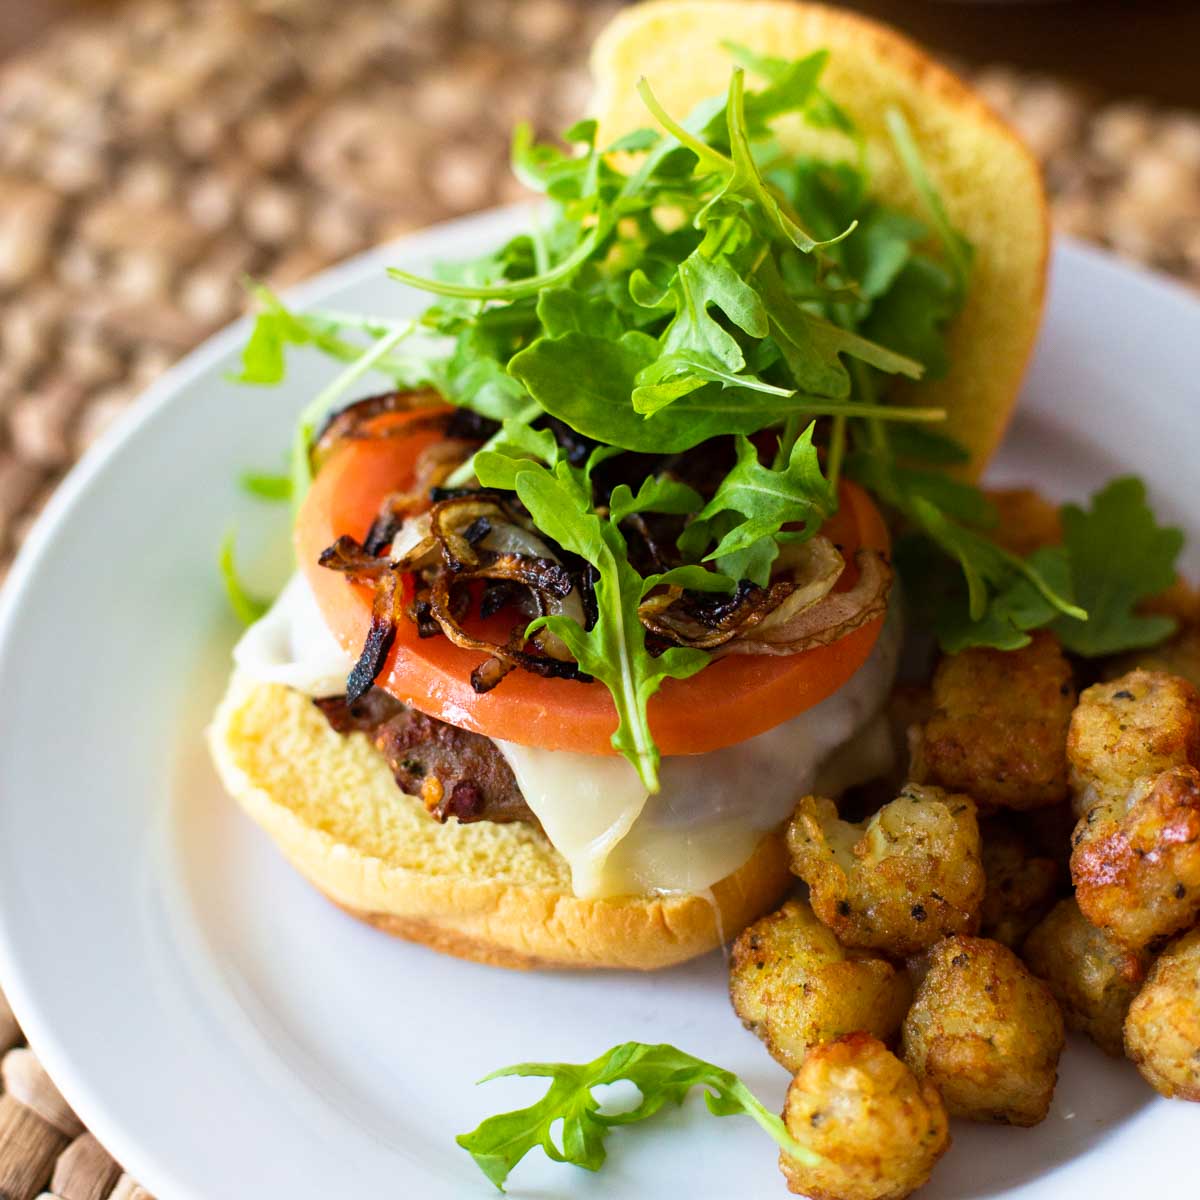 An oven baked turkey burger sits on an open faced bun and is topped with fresh tomato slices, green arugula leaves, and a melted slice of cheese. Tater tots sit next to it for a side dish.